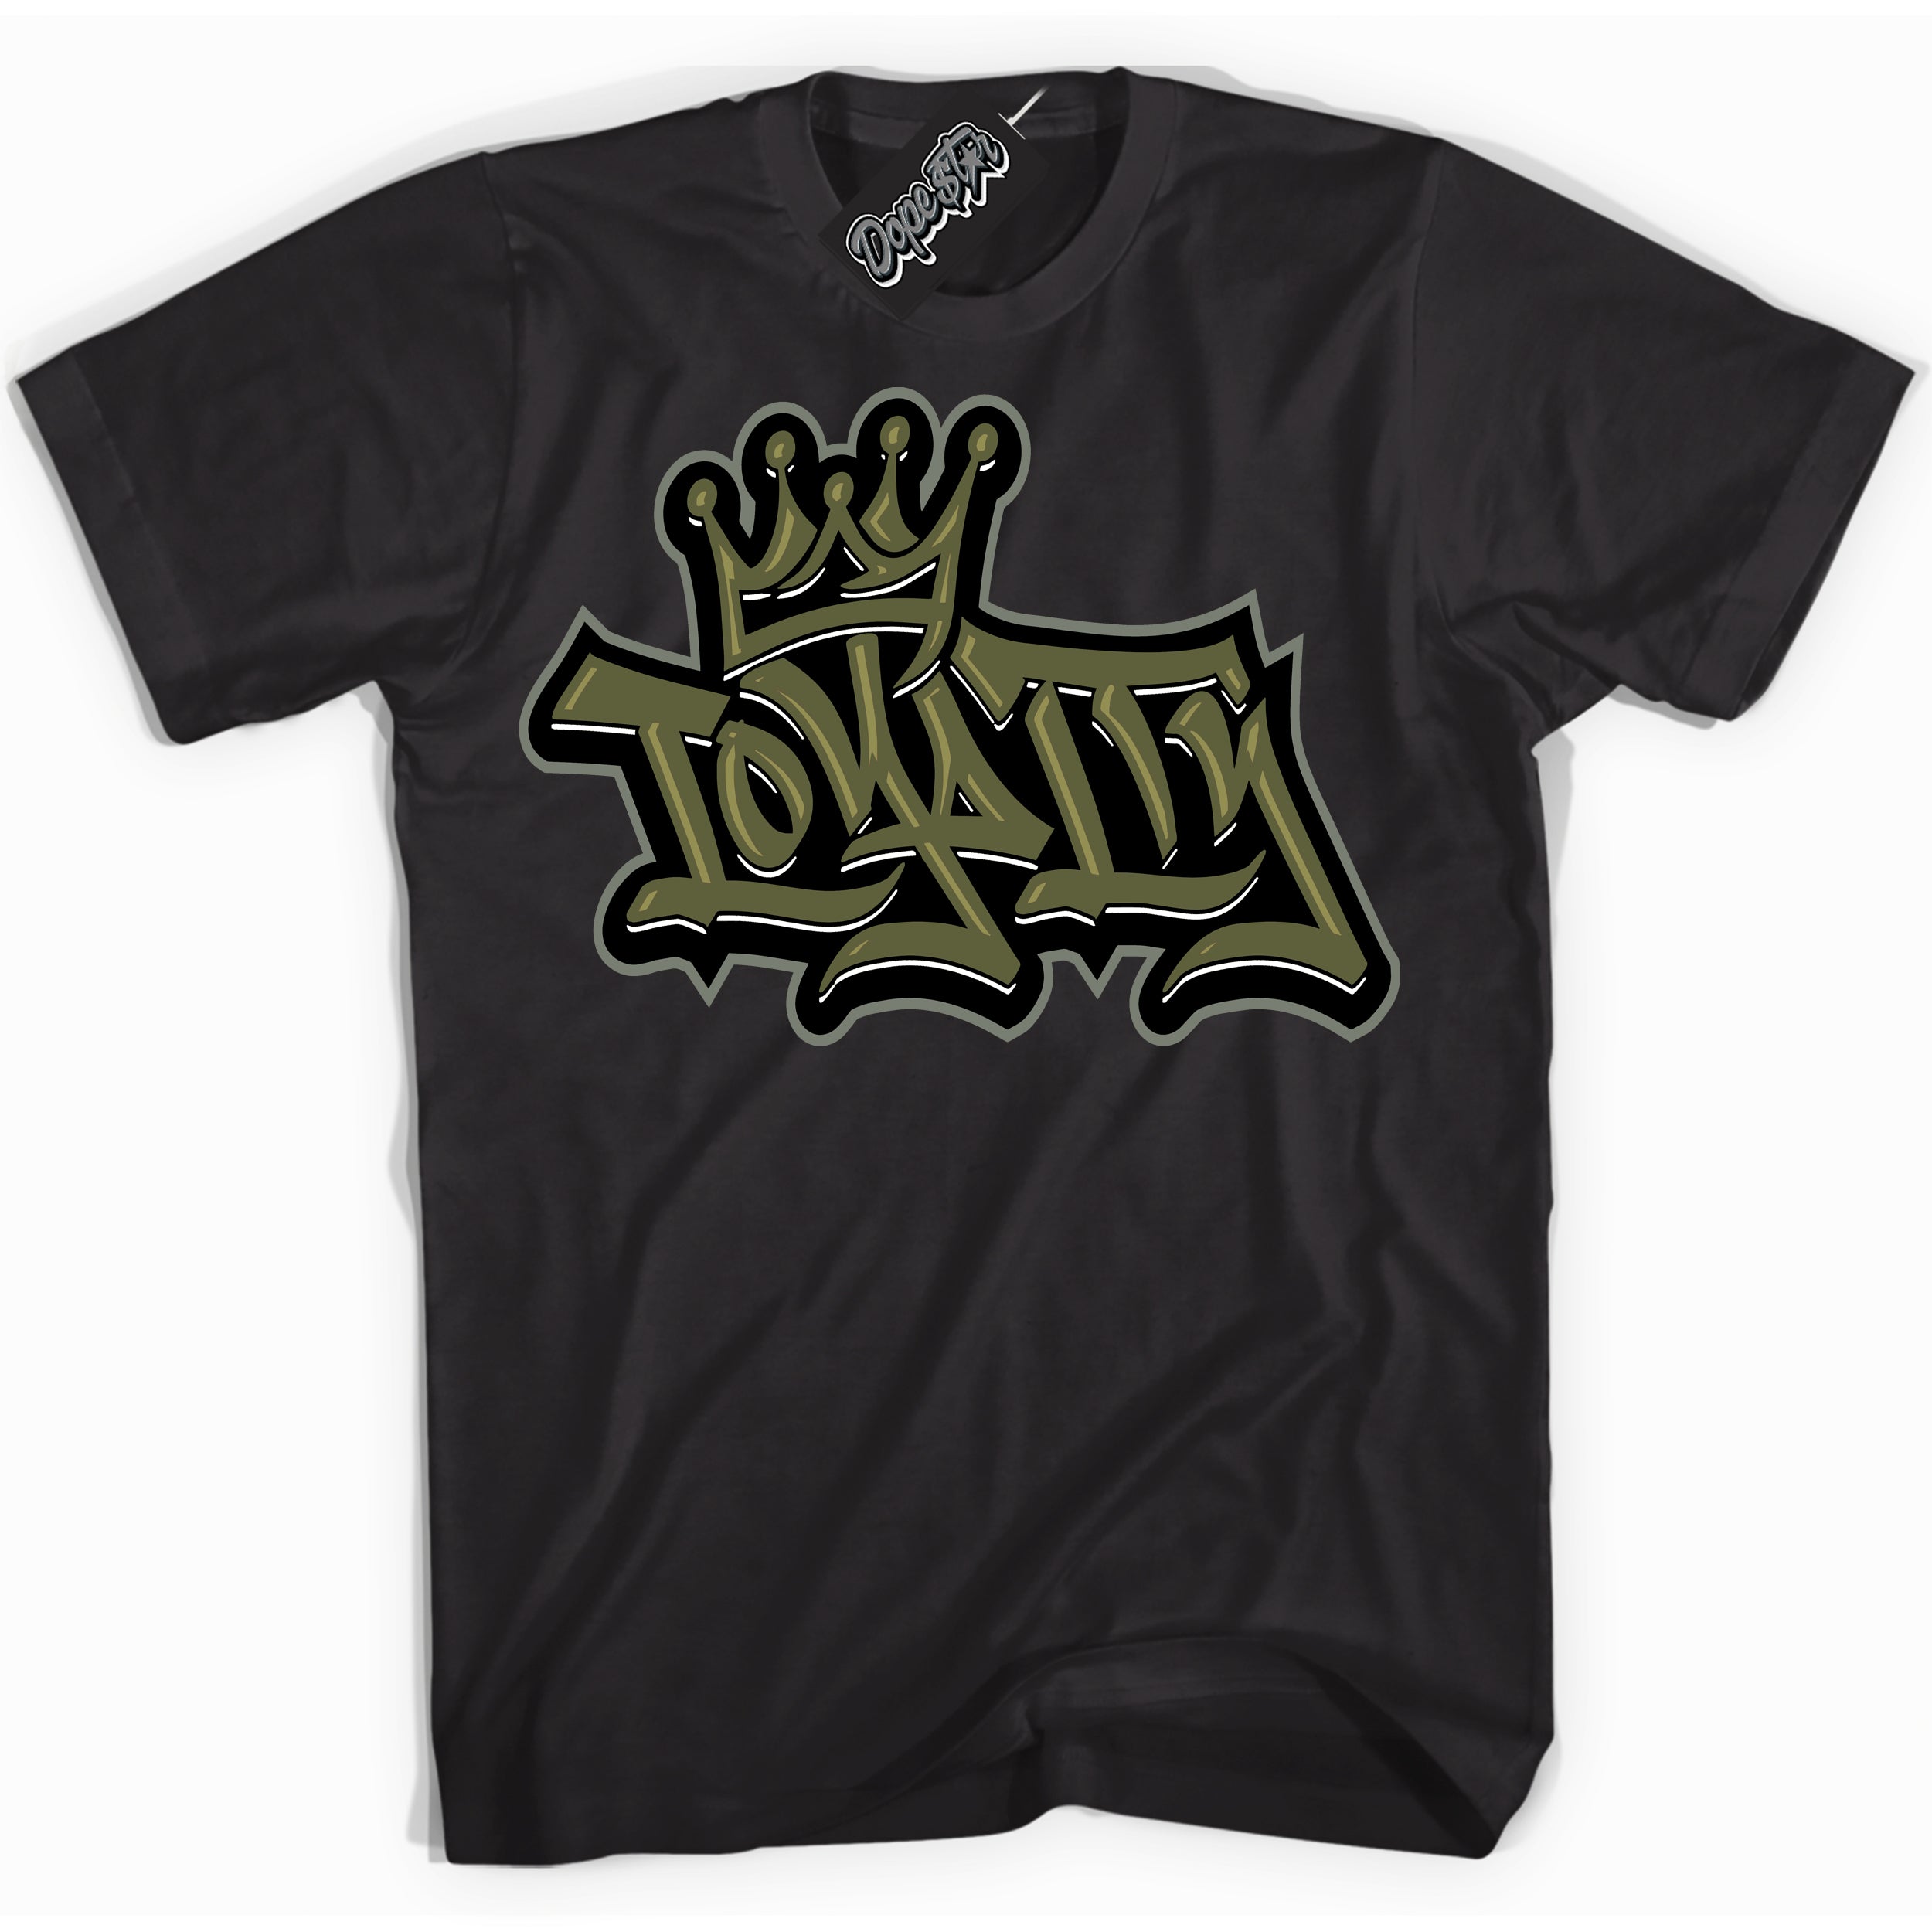 Cool Black graphic tee with “ Loyaity ” print, that perfectly matches Craft Olive 4s sneakers 